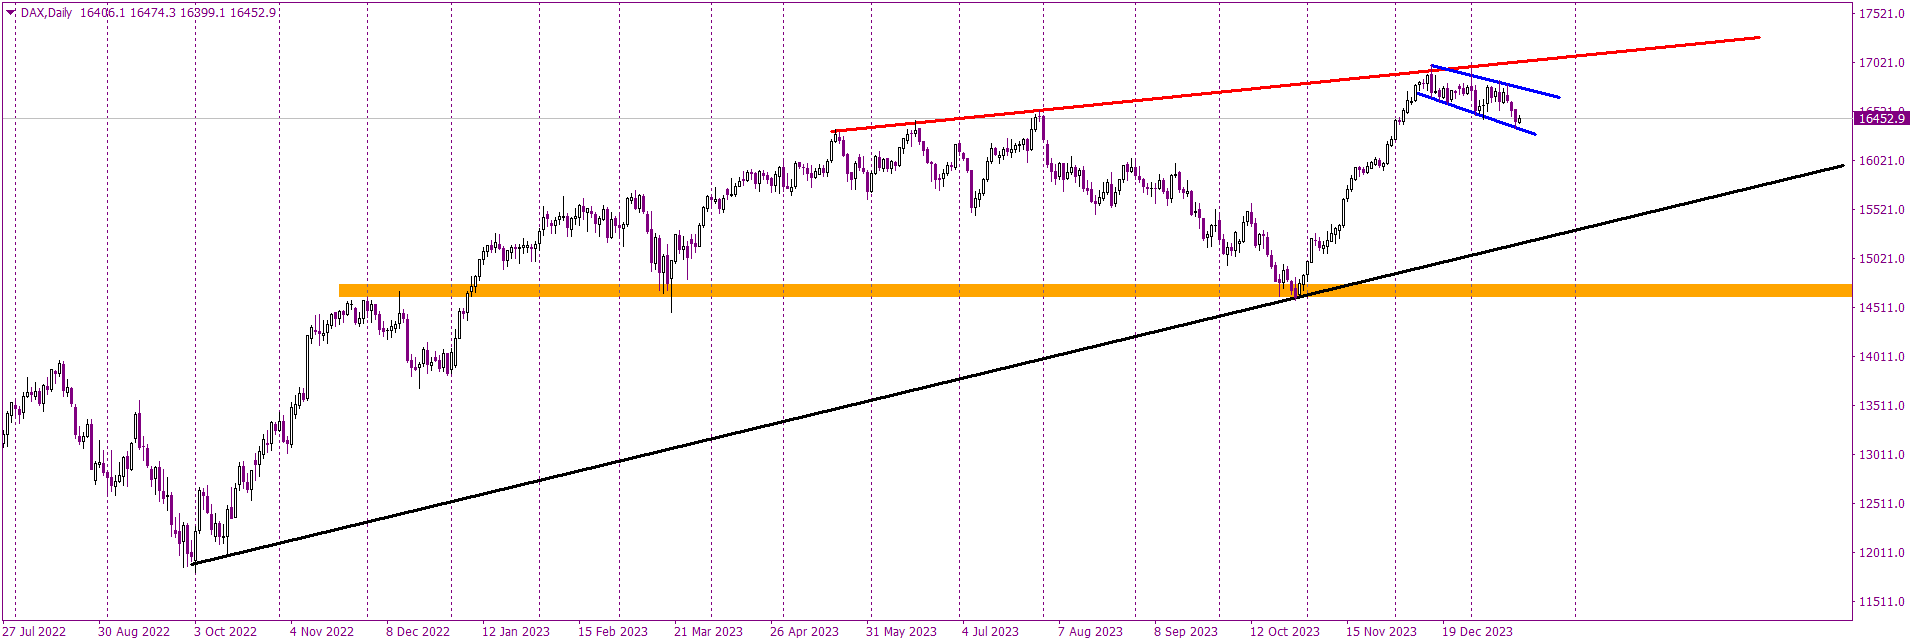 German DAX Continues the Decline Inside of the Flag Formation